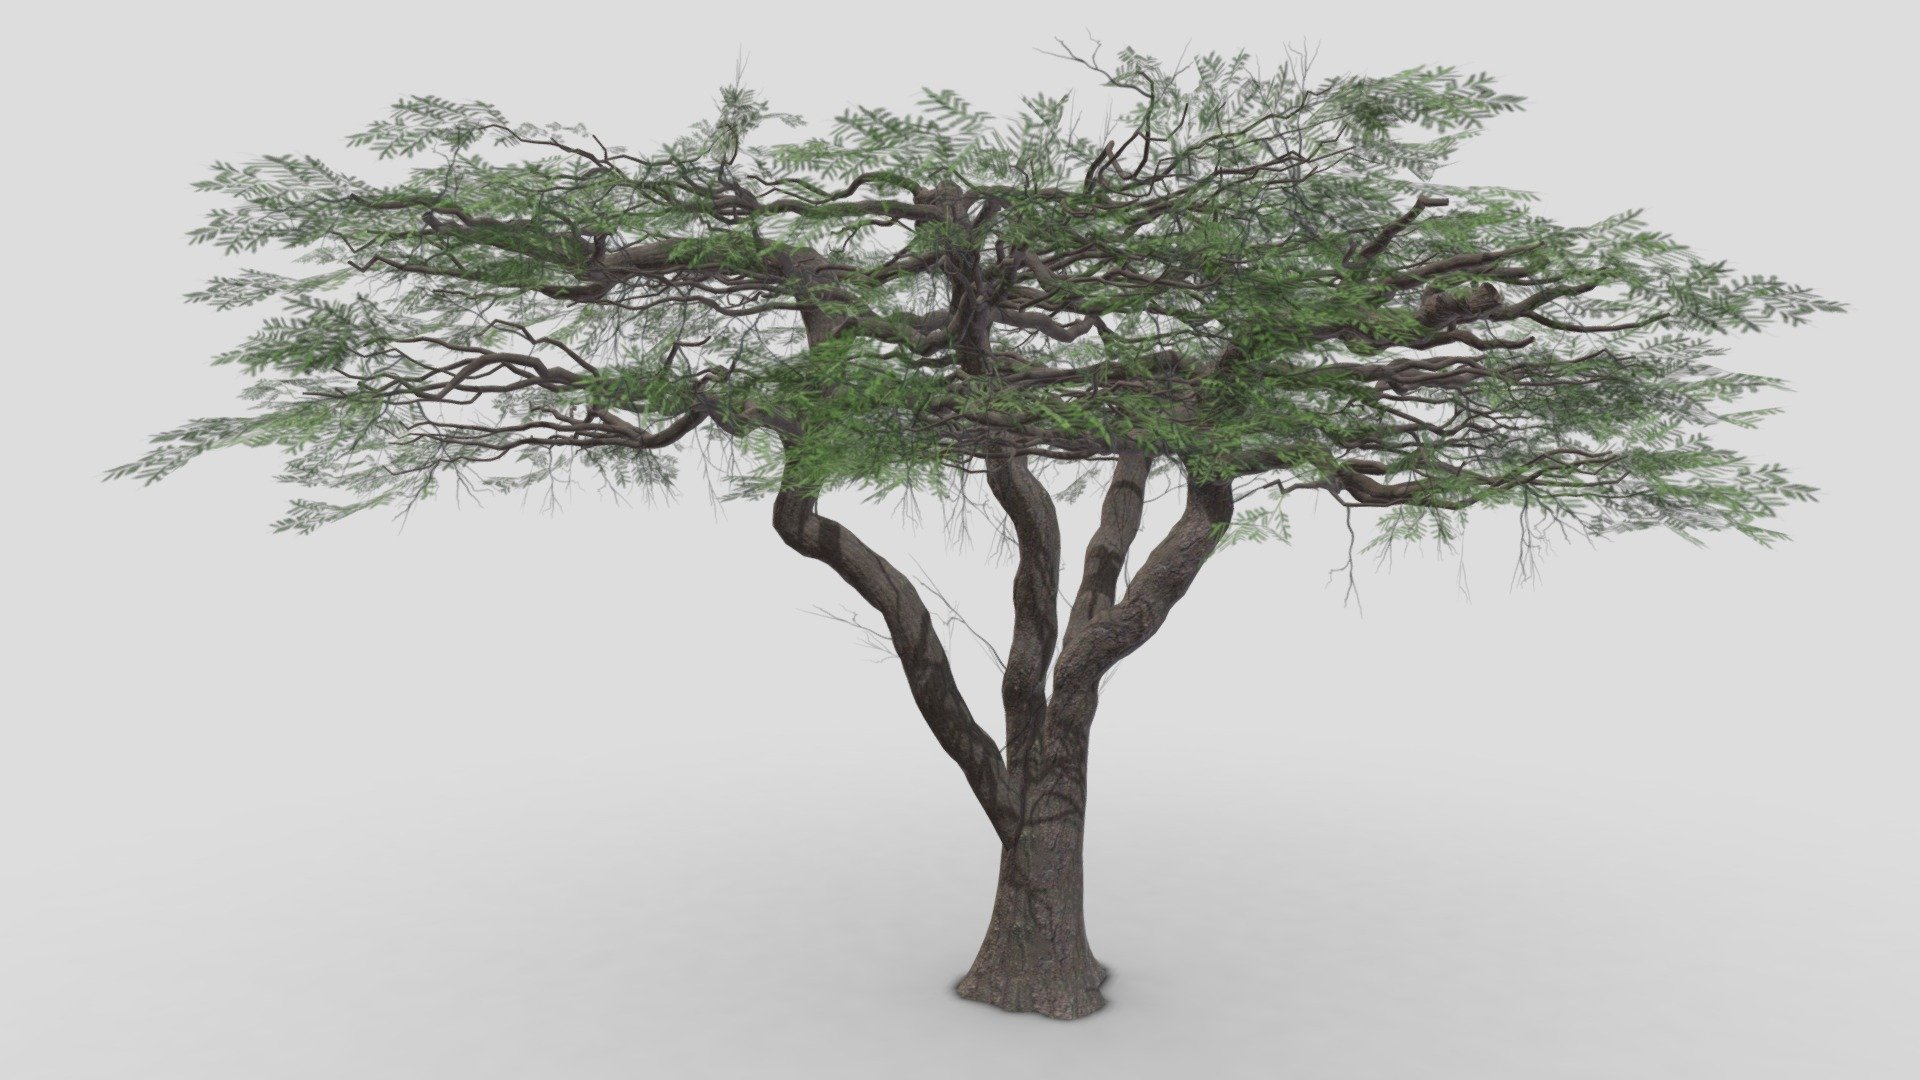 acacia, (genus Acacia), genus of about 160 species of trees and shrubs in the pea family (Fabaceae). Acacias are native to tropical and subtropical regions of the world, particularly Australia (where they are called wattles) and Africa, where they are well-known landmarks on the veld and savanna 3d model